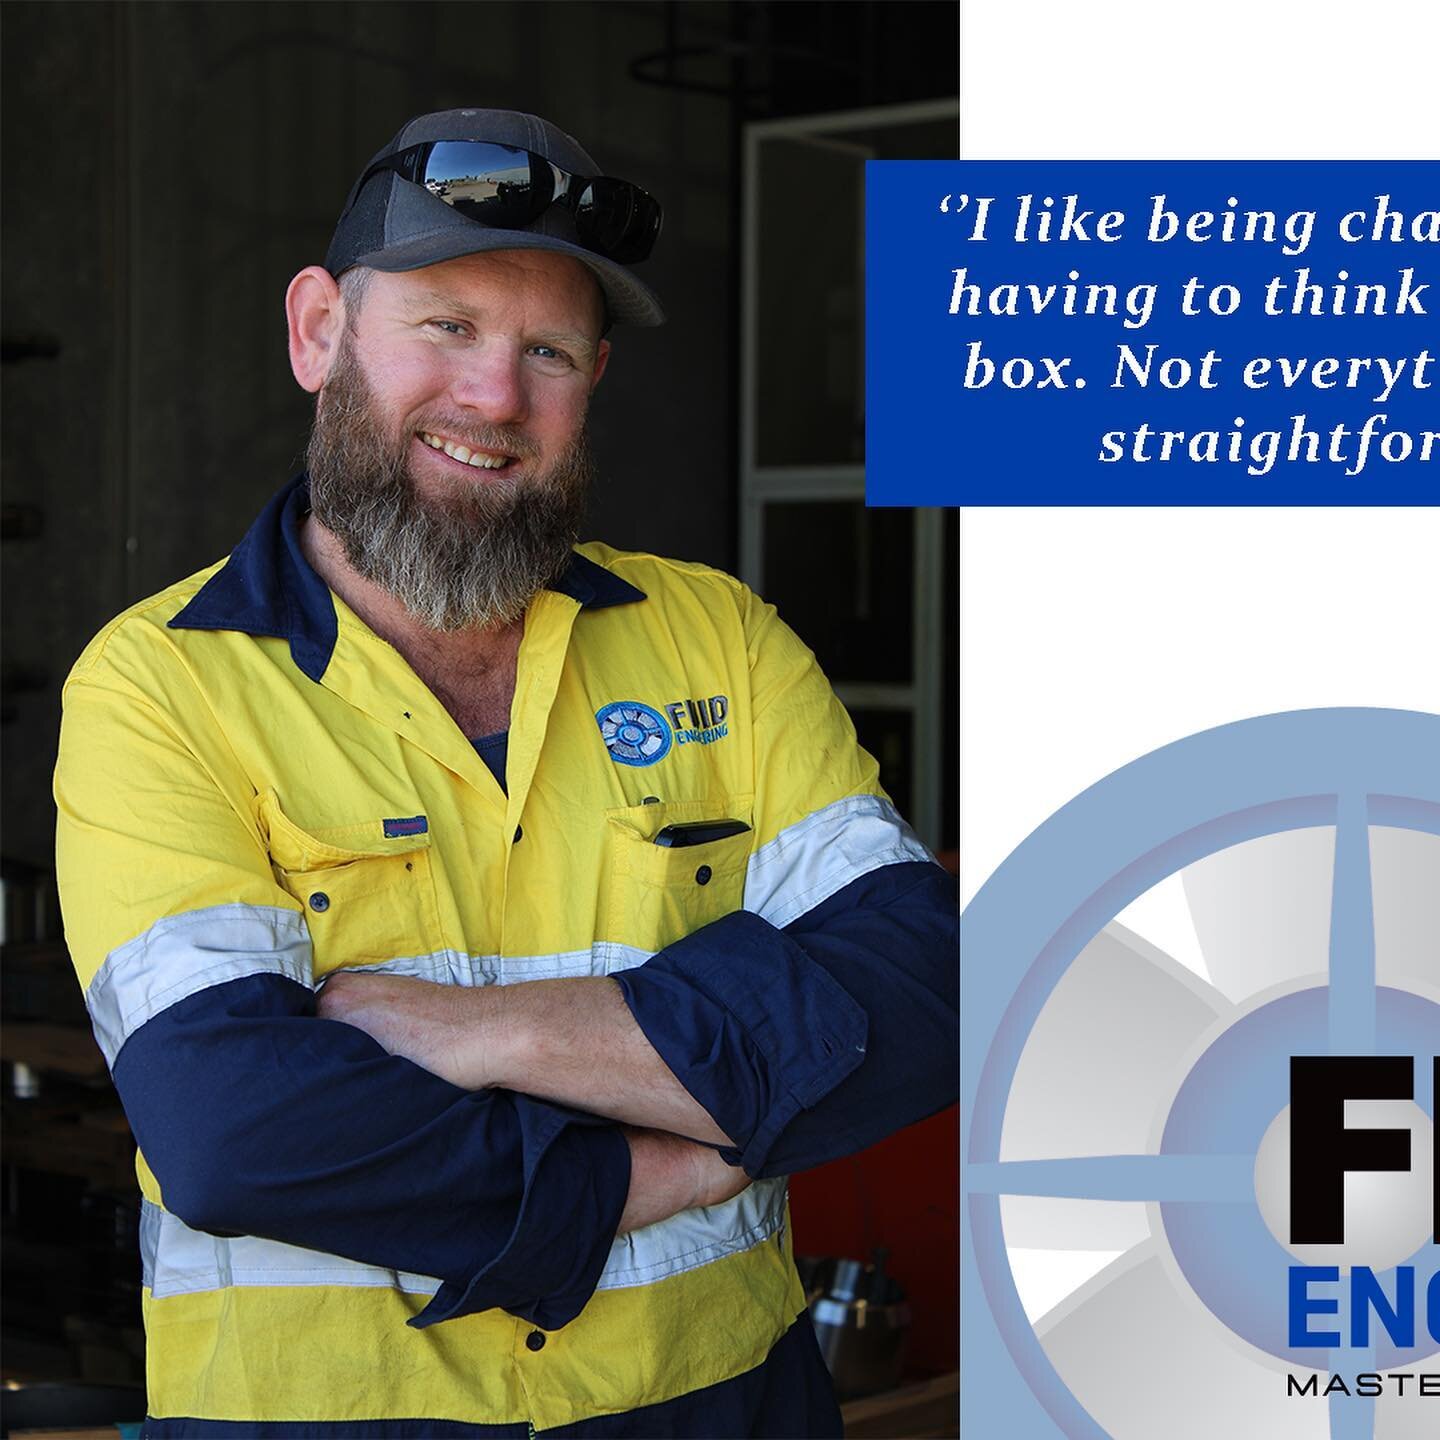 BEING PART OF THE TEAM - Lloyd&rsquo;s story 📃
Would you like to read the whole article? Please visit our website via the link in our bio 🔗

#manufacturing #engineering #engineer #pump #ornel #griffith #nsw #australia #australianmade #australianmad